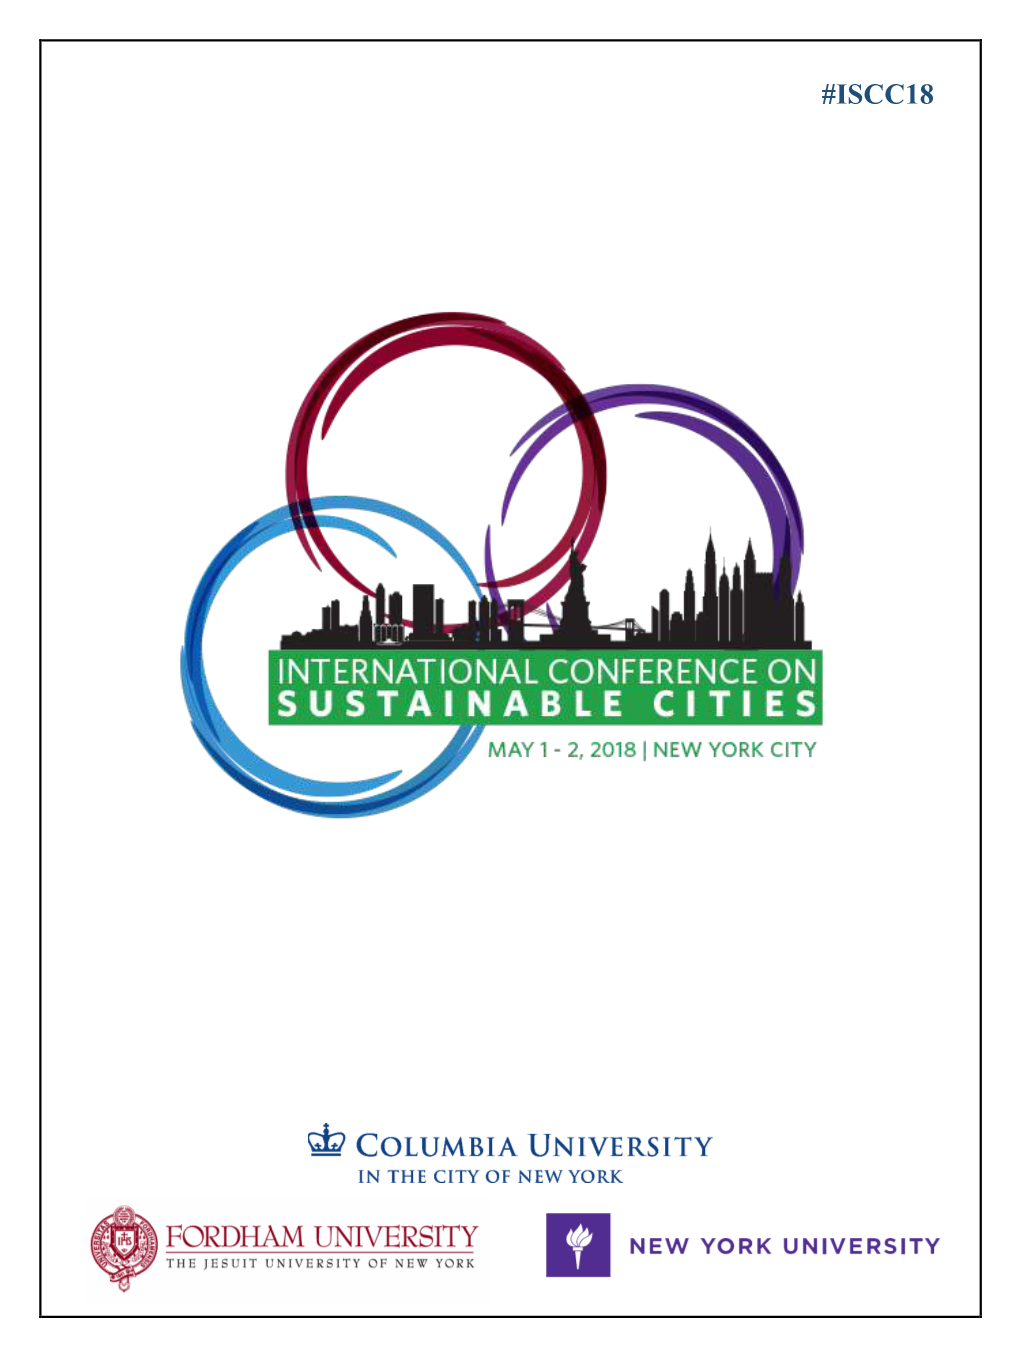 Download the Sustainable Cities Program